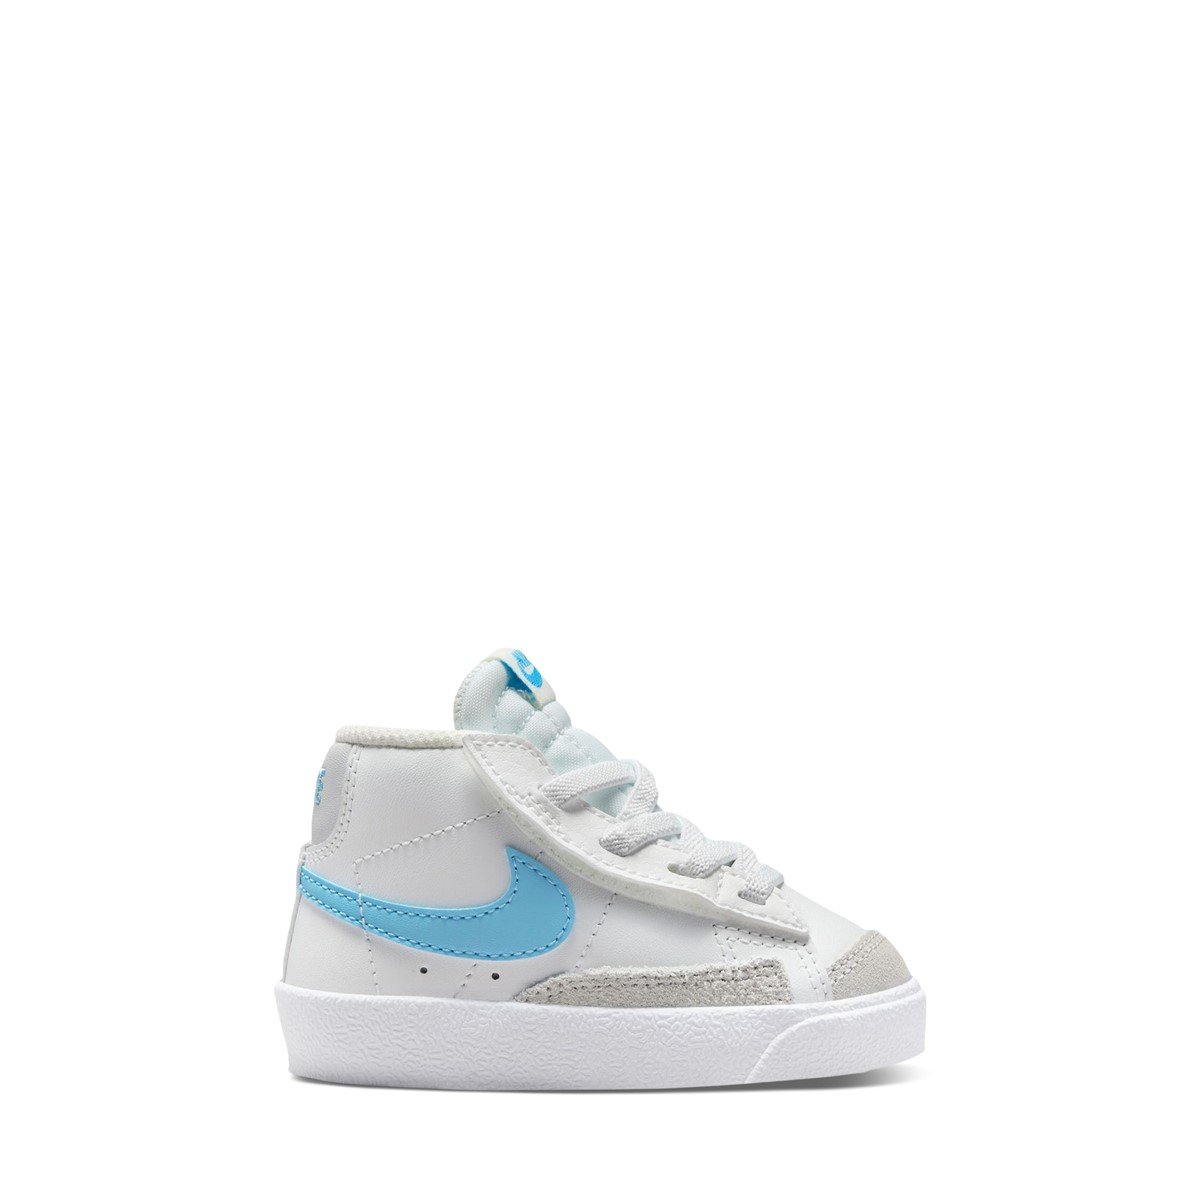 Toddler's Blazer Mid '77 Sneakers in White/Blue